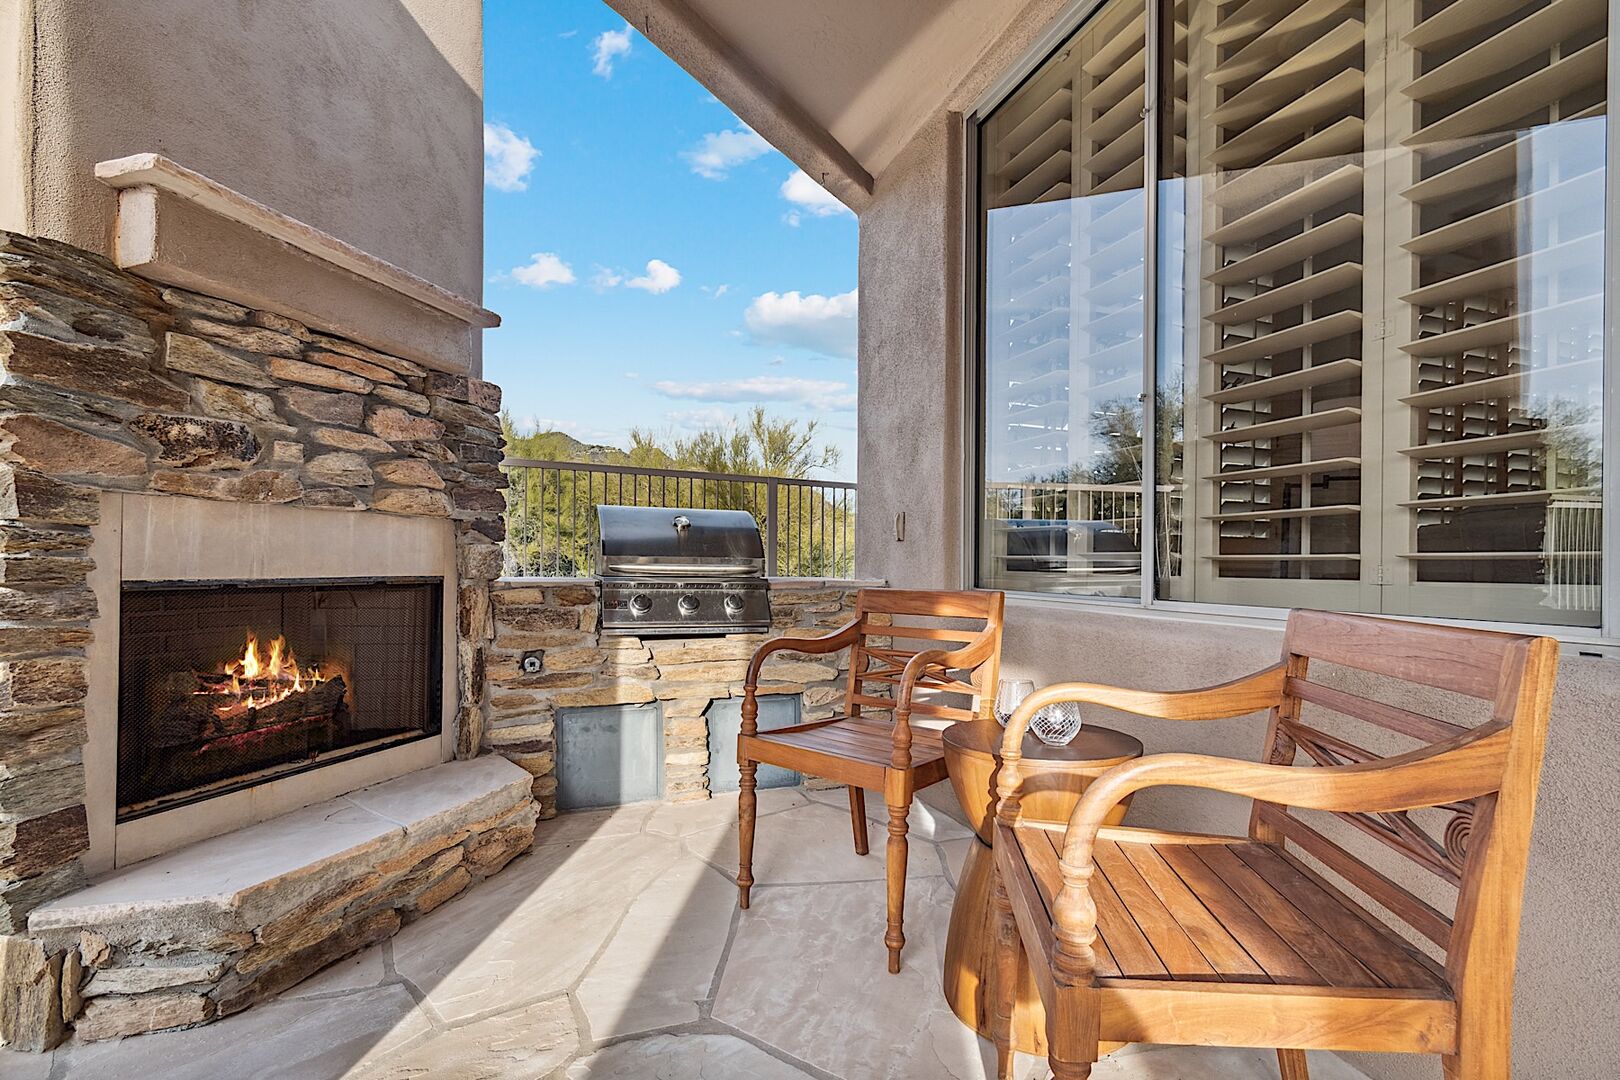 Outdoor fireplace, built in gas BBQ grill and two chairs to enjoy a glass of wine while BBQing